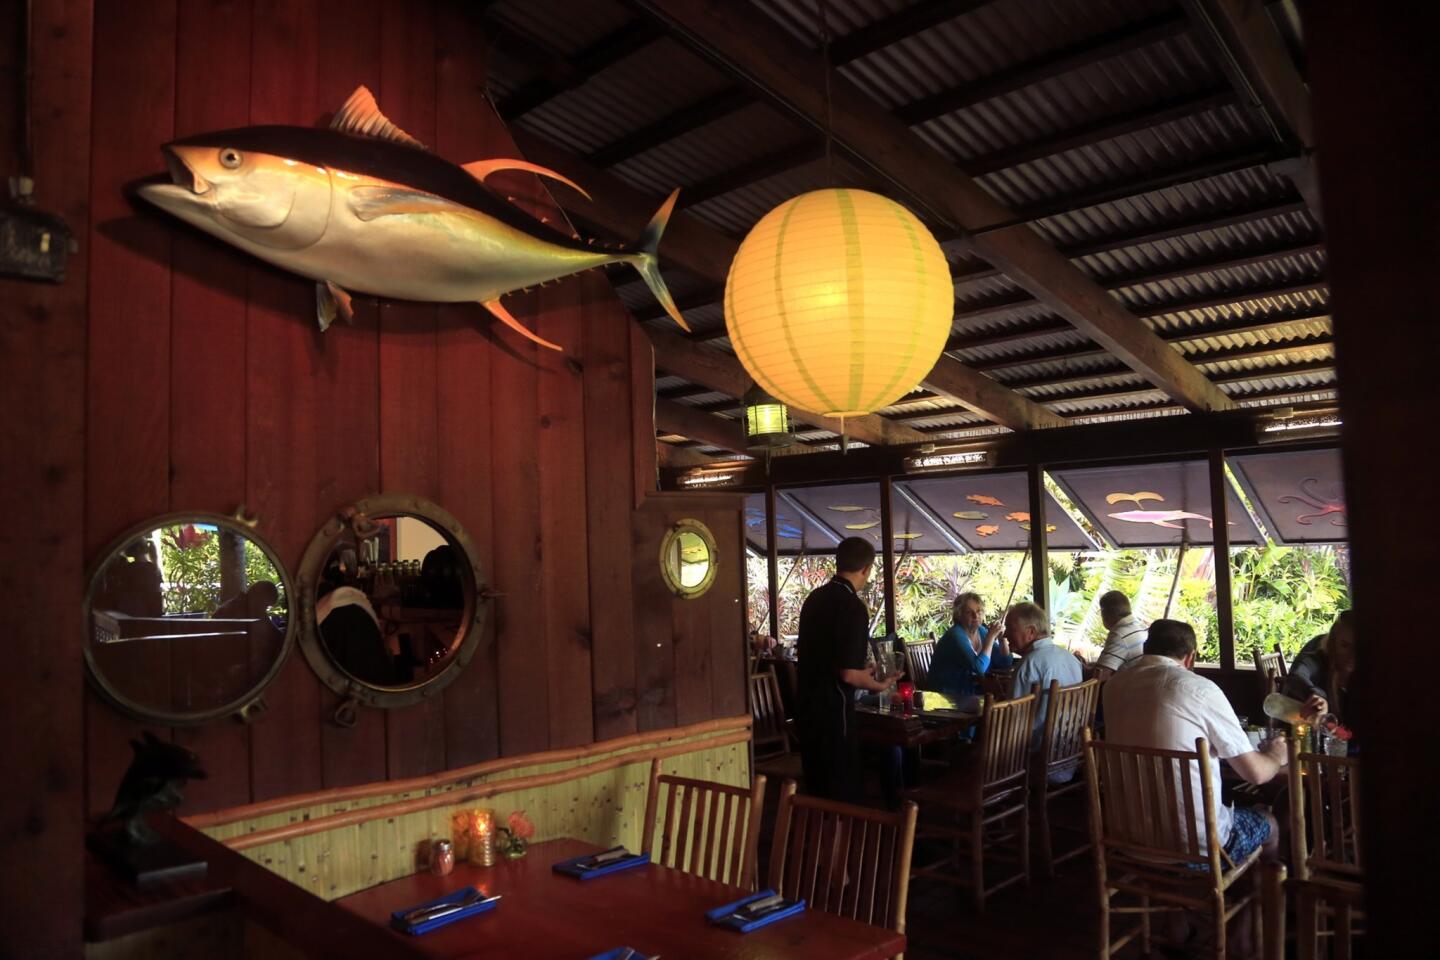 The Hanalei Dolphin Restaurant and Fish Market